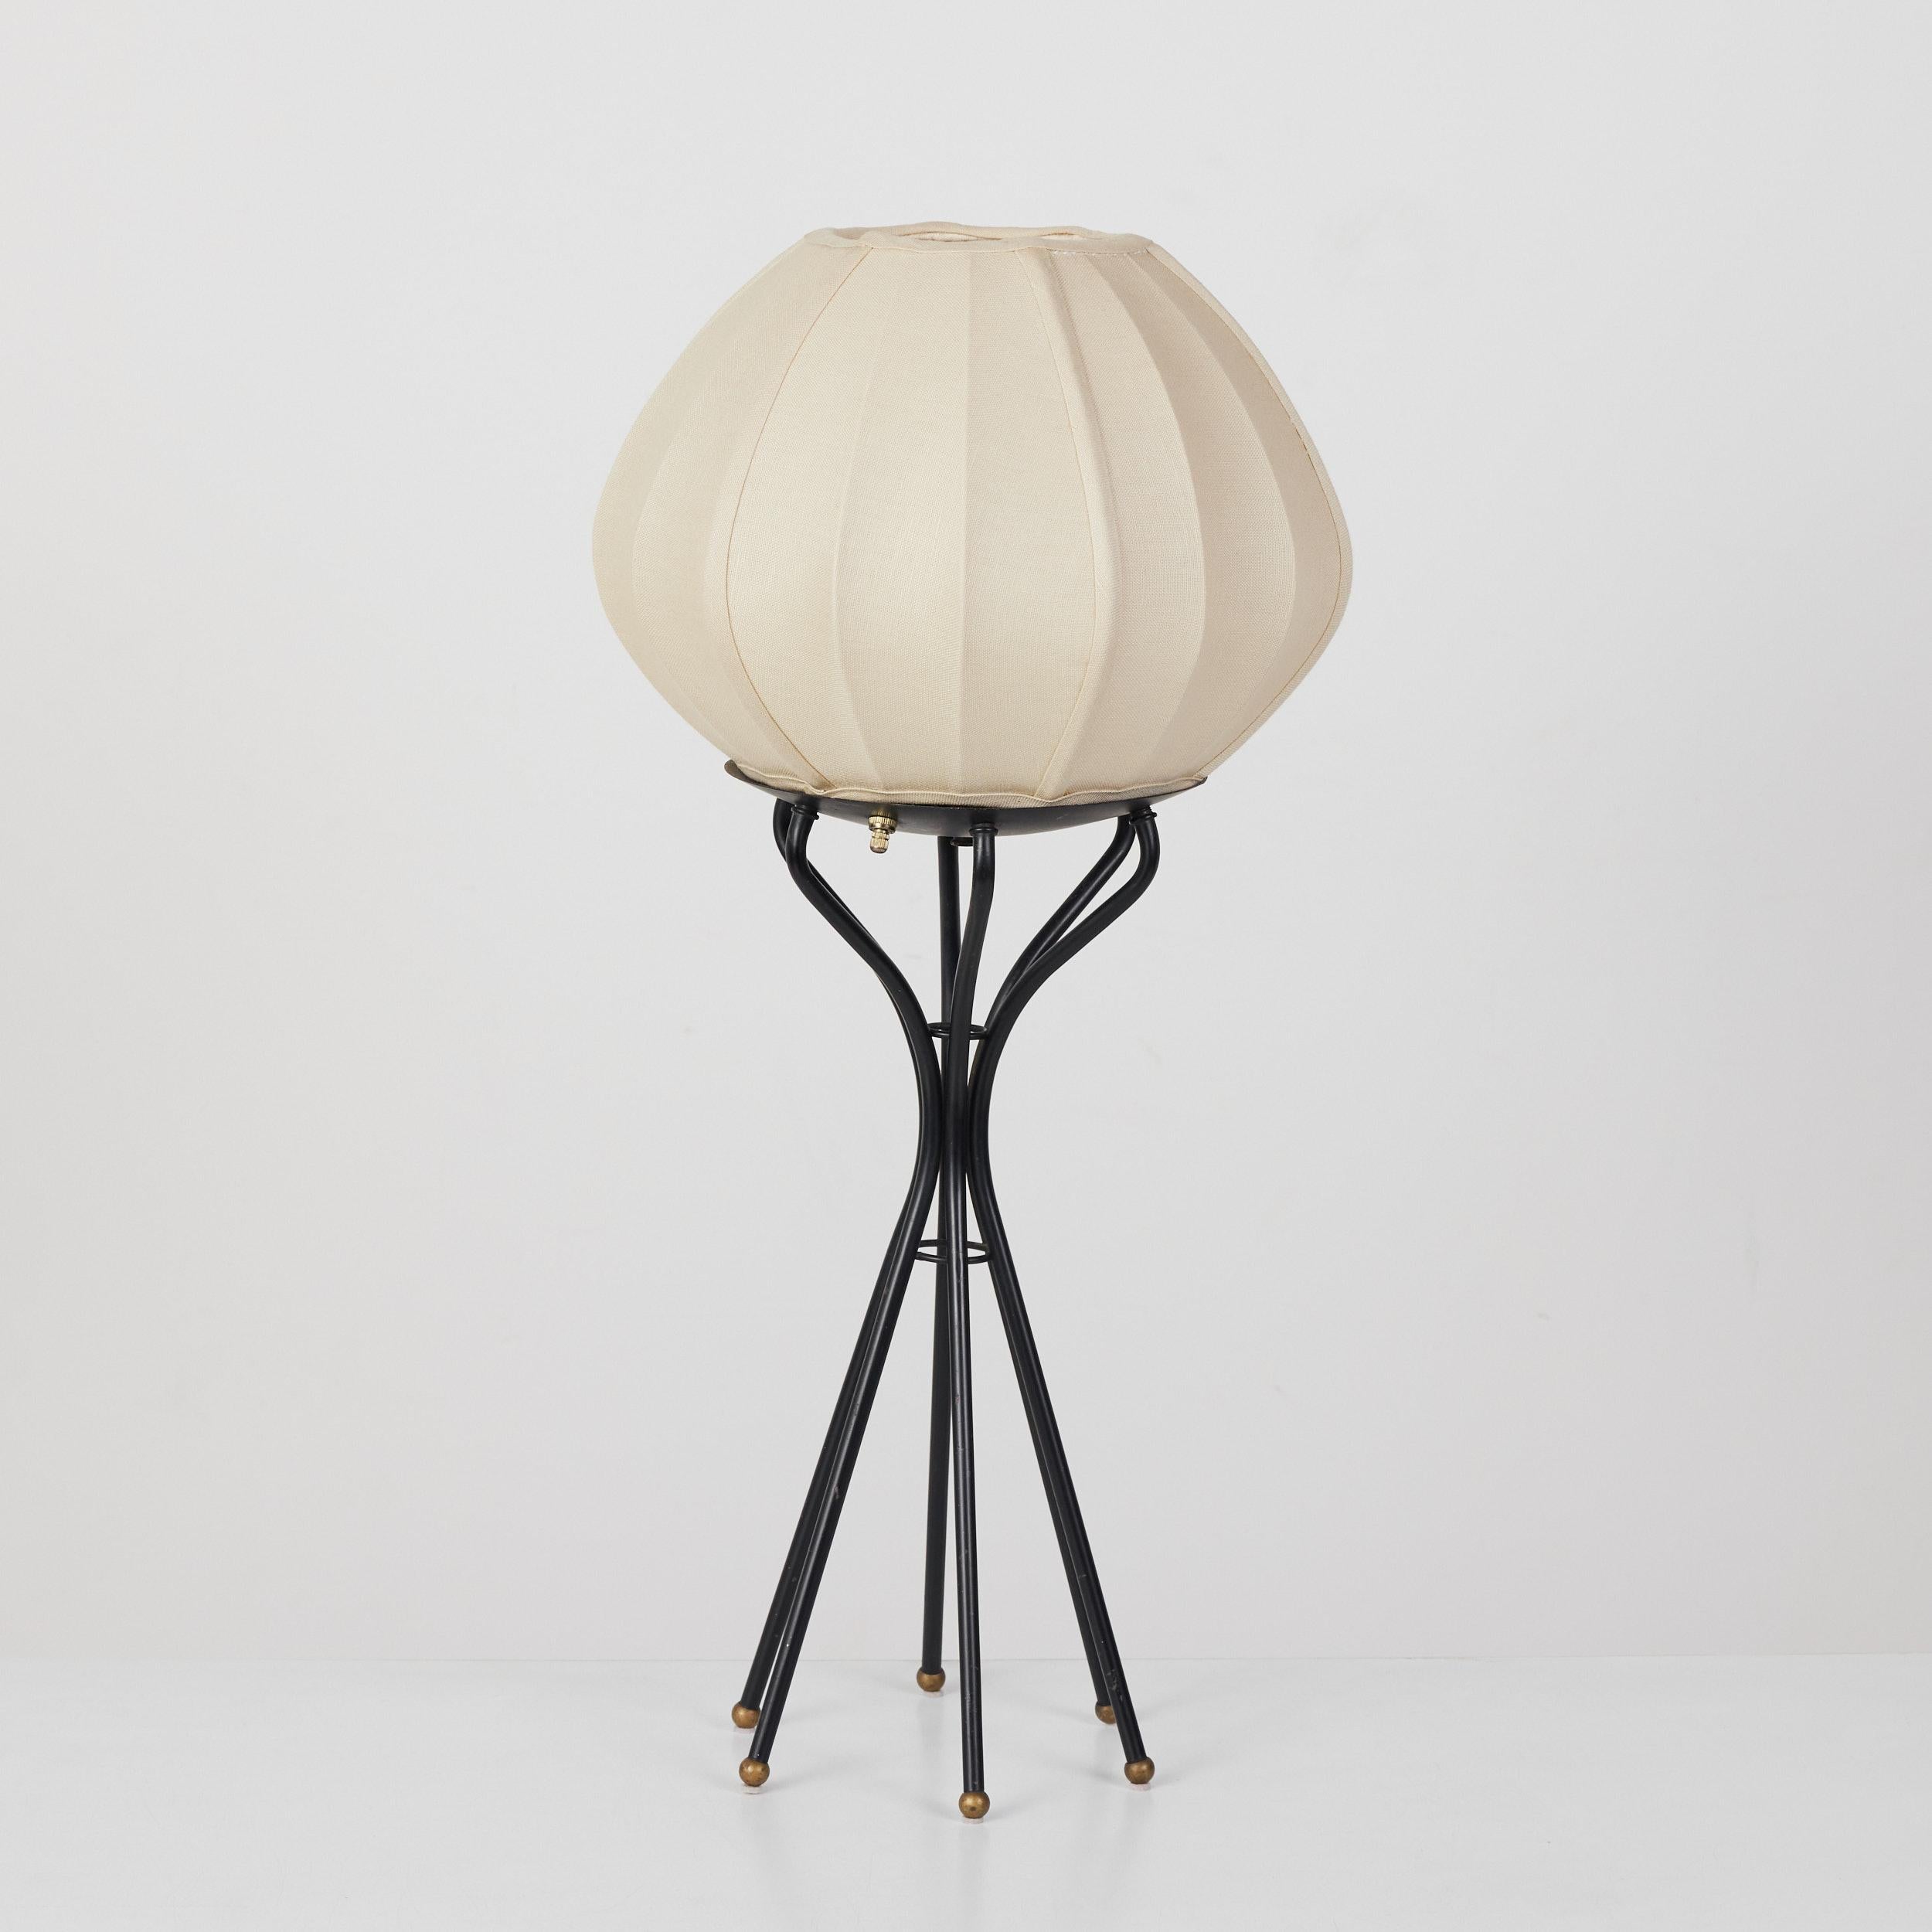 20th Century Six Legged Cocoon Table Lamp with Linen Shade